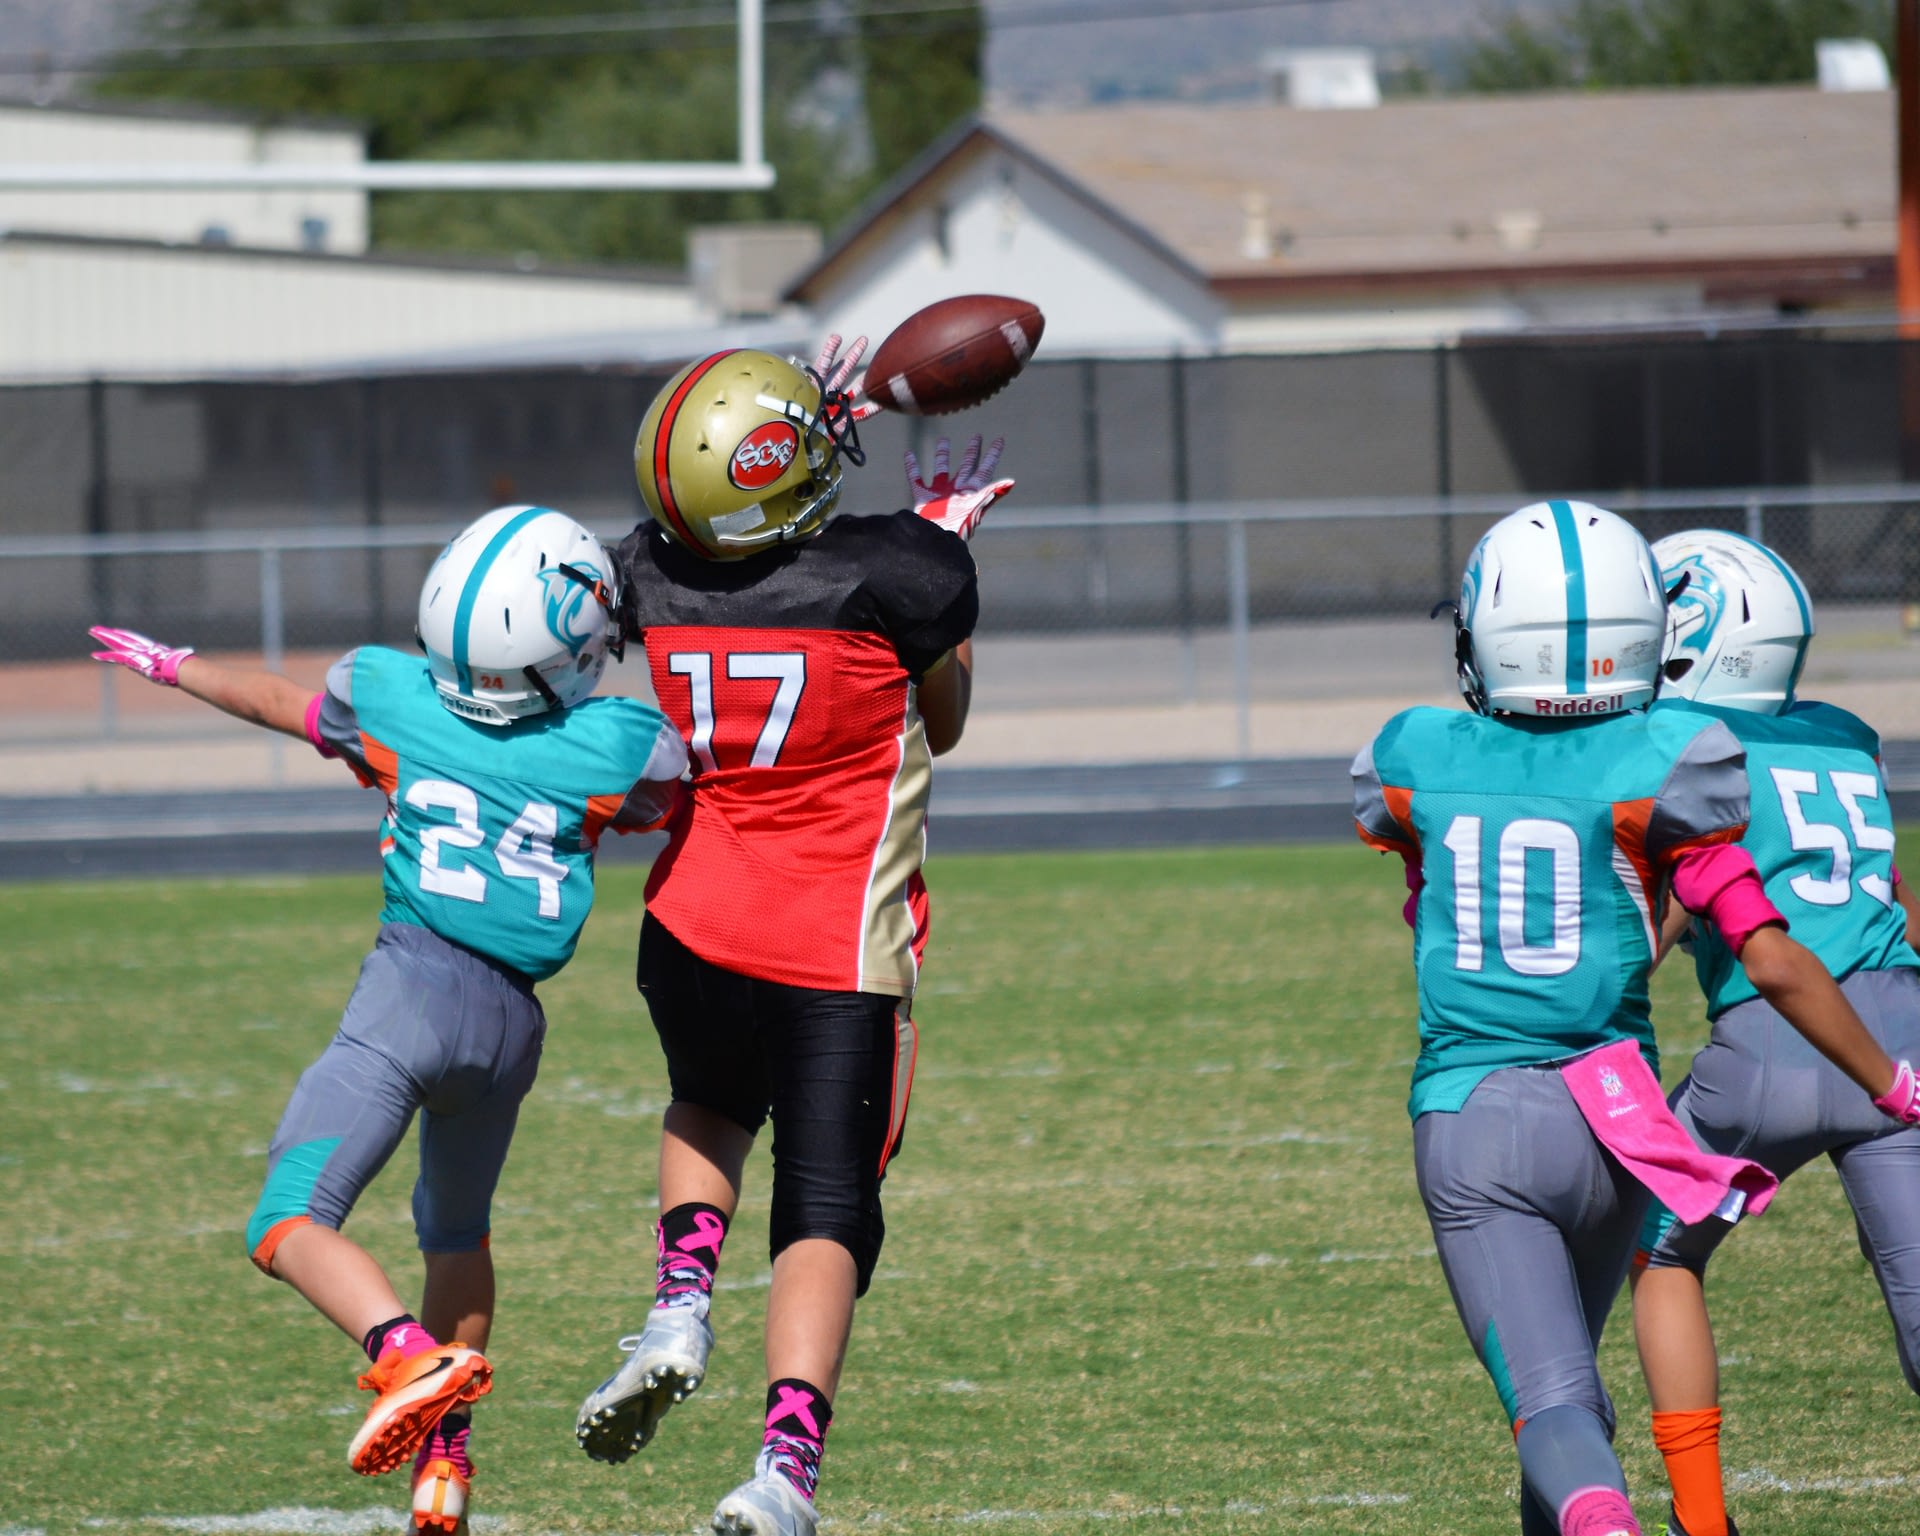 YOUTH FOOTBALL PLAYOFFS 11U Dolphins advance with win over 49ers